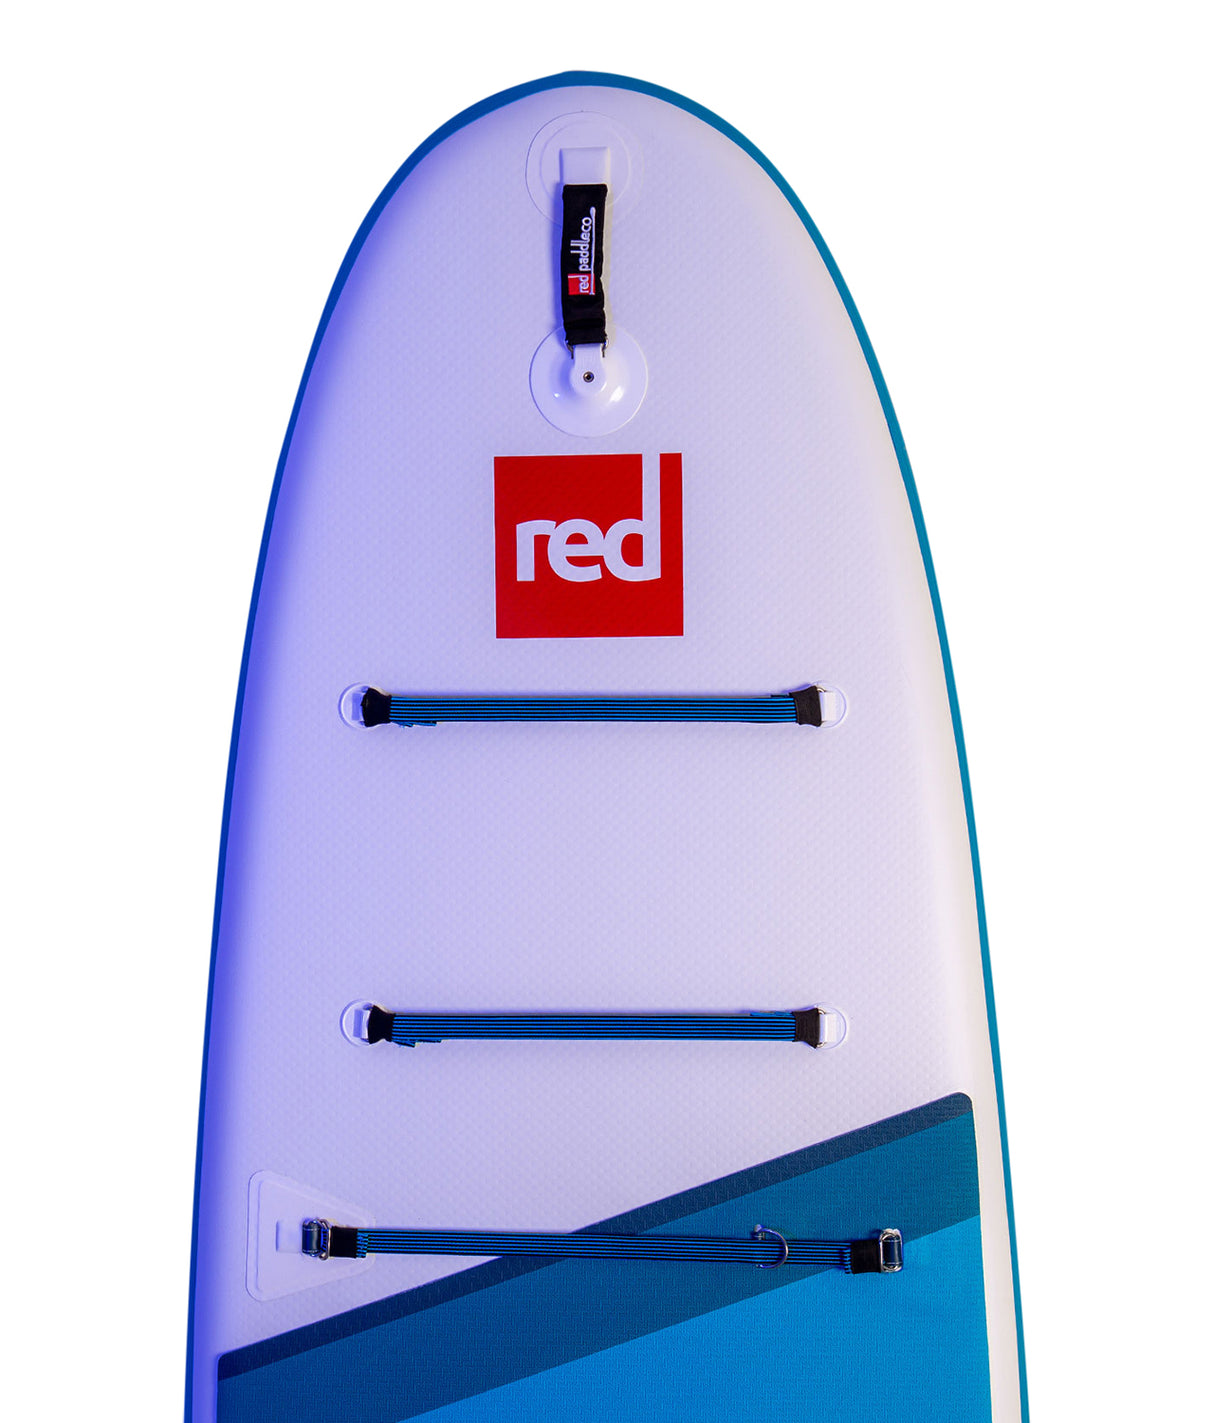 Tabla paddle surf Ride 10'6 - Red Paddle Co